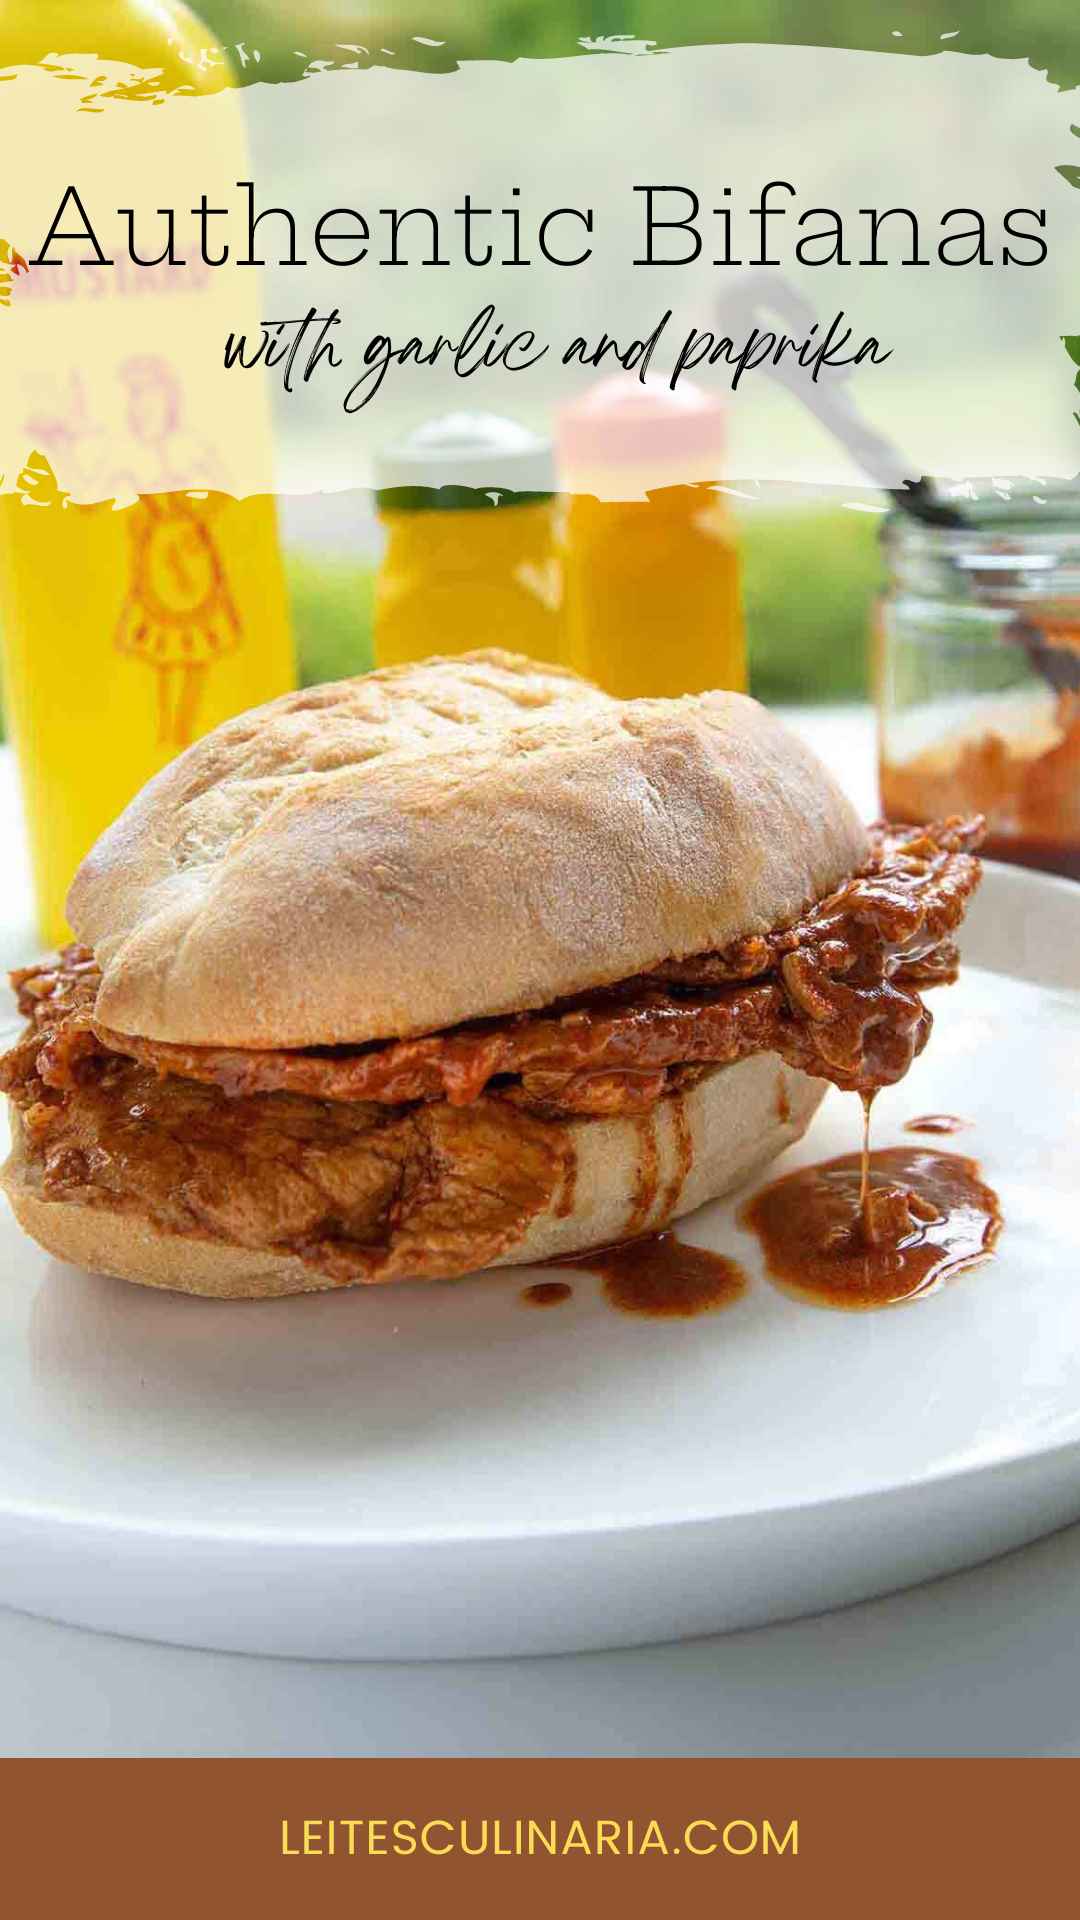 A sandwich made with a large roll, thinly sliced pork, and a paprika sauce dripping out of it on a white plate.